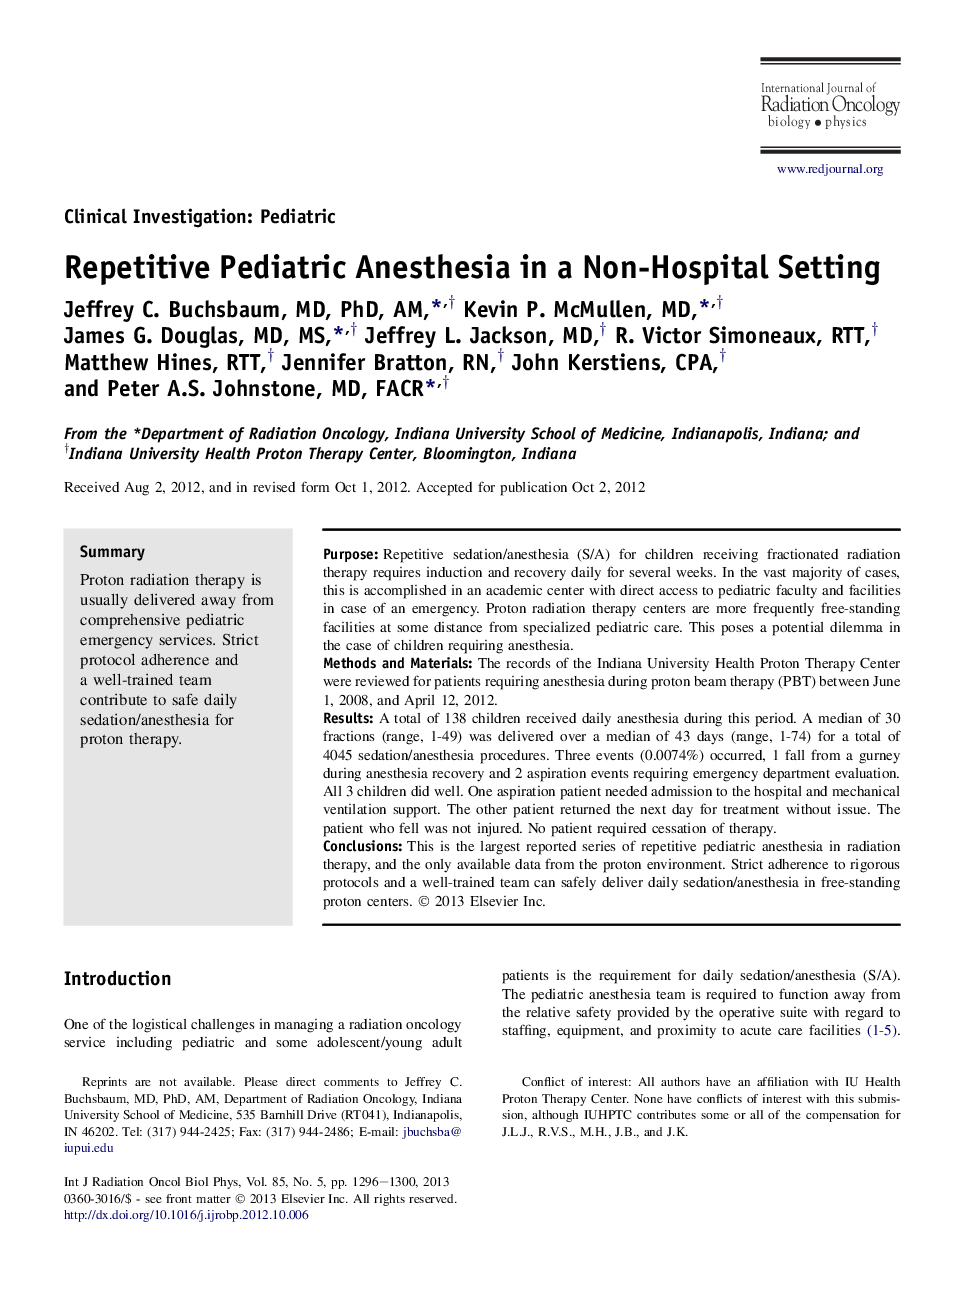 Repetitive Pediatric Anesthesia in a Non-Hospital Setting